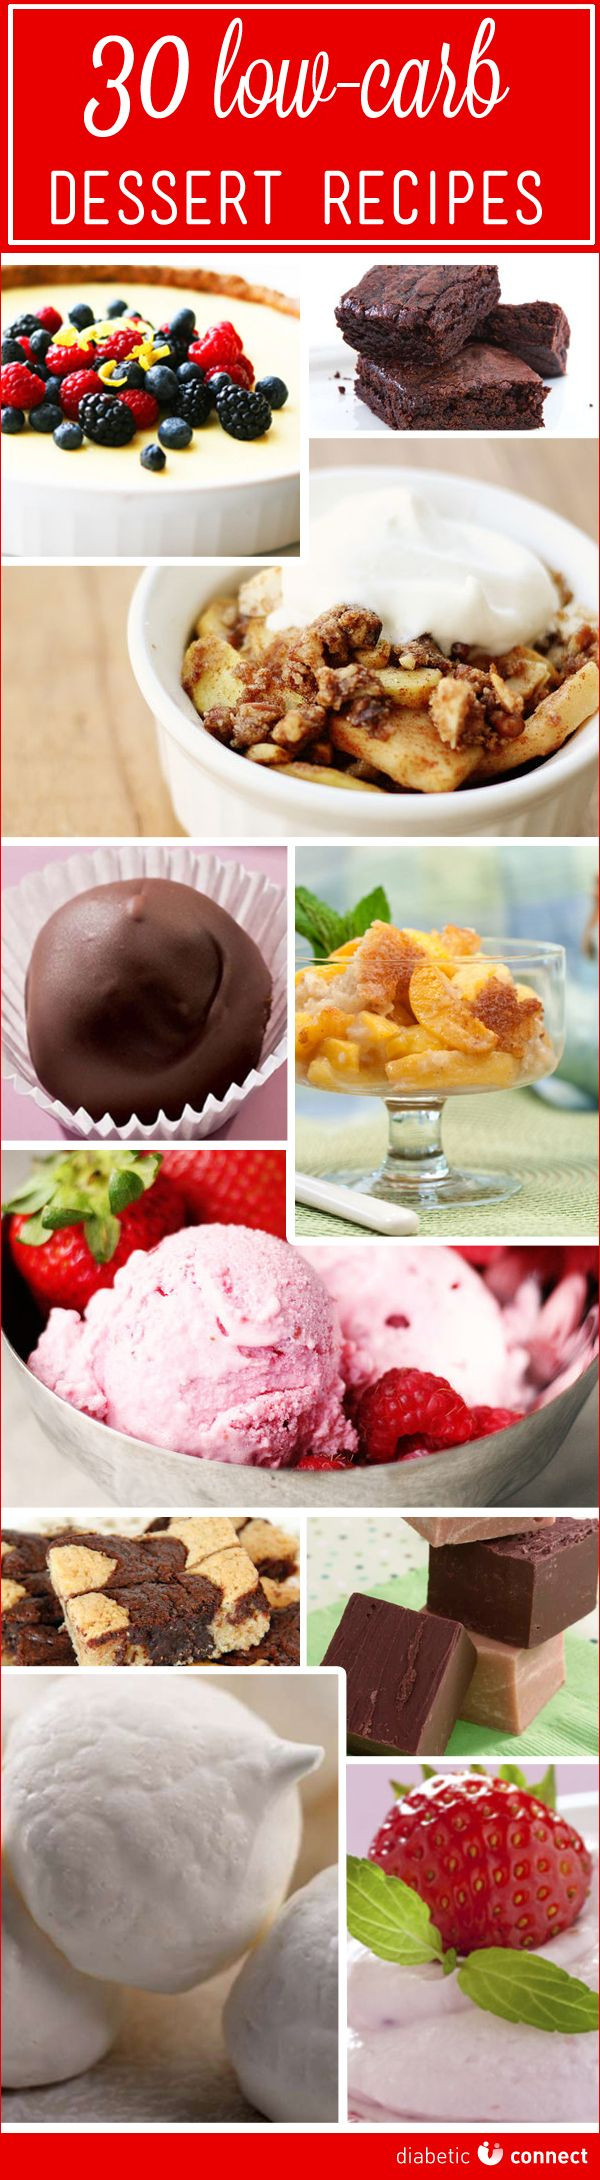 Healthy Diabetic Desserts
 61 best Diabetic & Kidney info recipes for Hubby images on